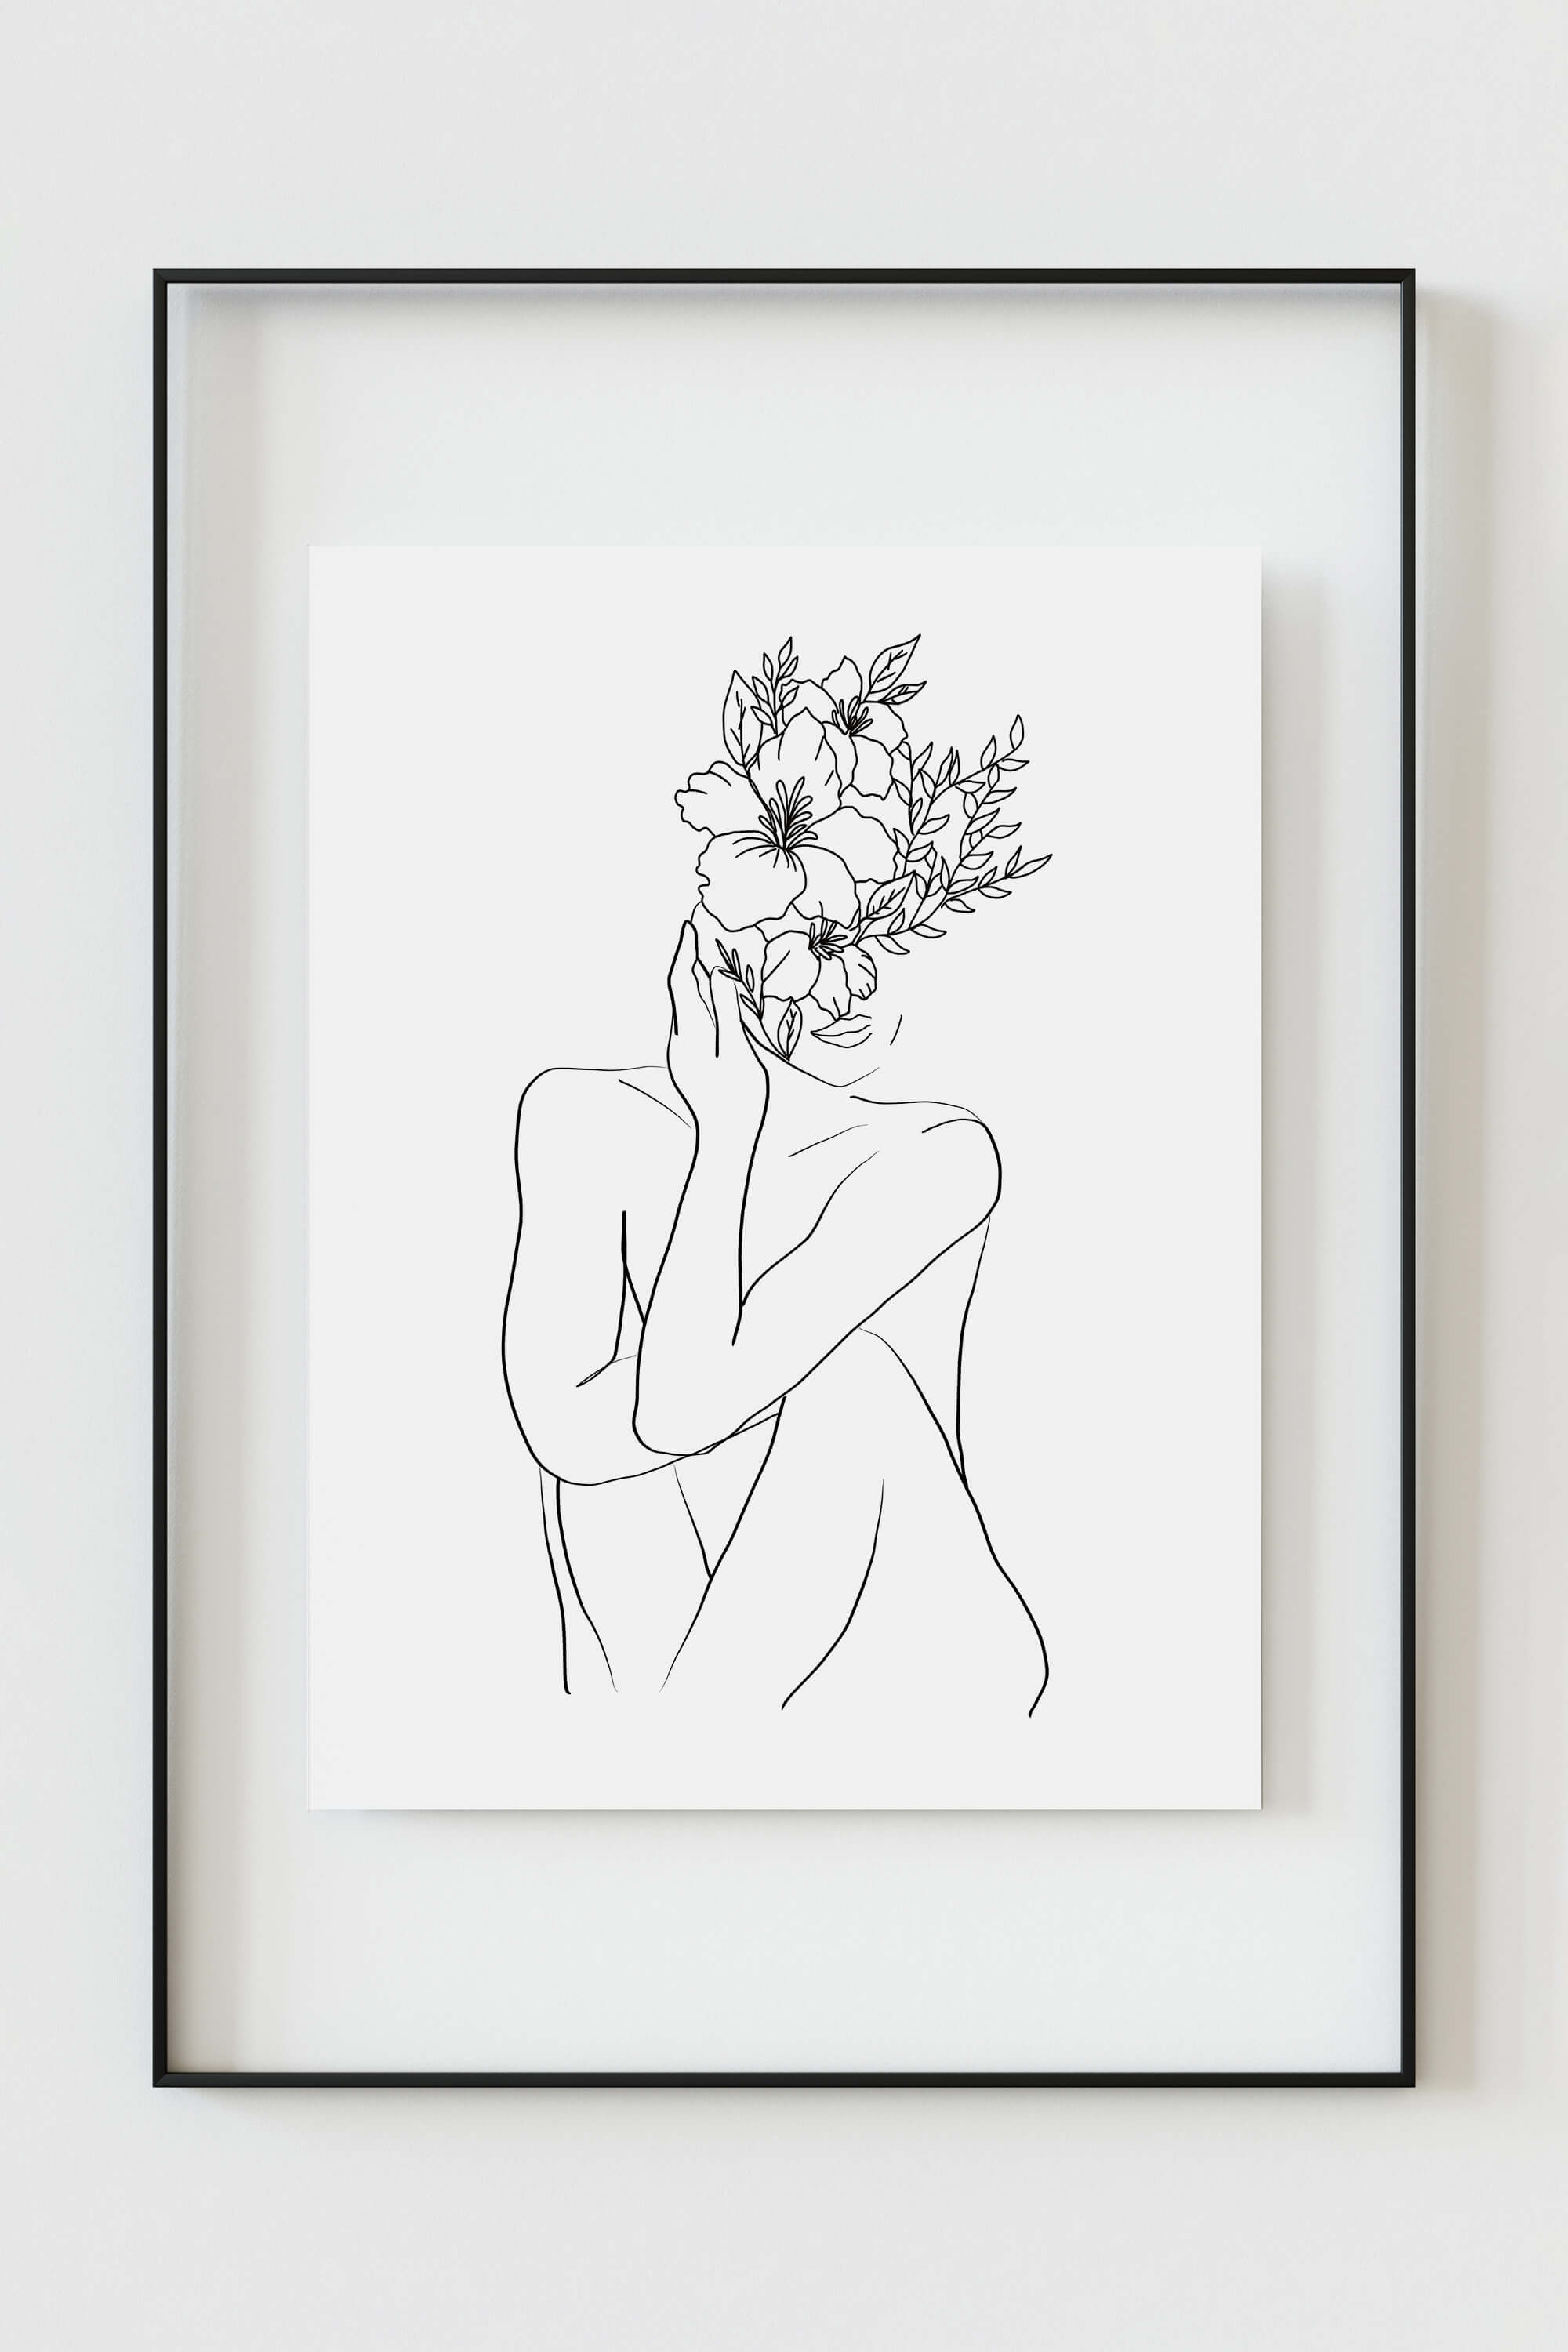 A captivating black and white line art drawing featuring a woman with a flower head, symbolizing empowerment and natural beauty. 